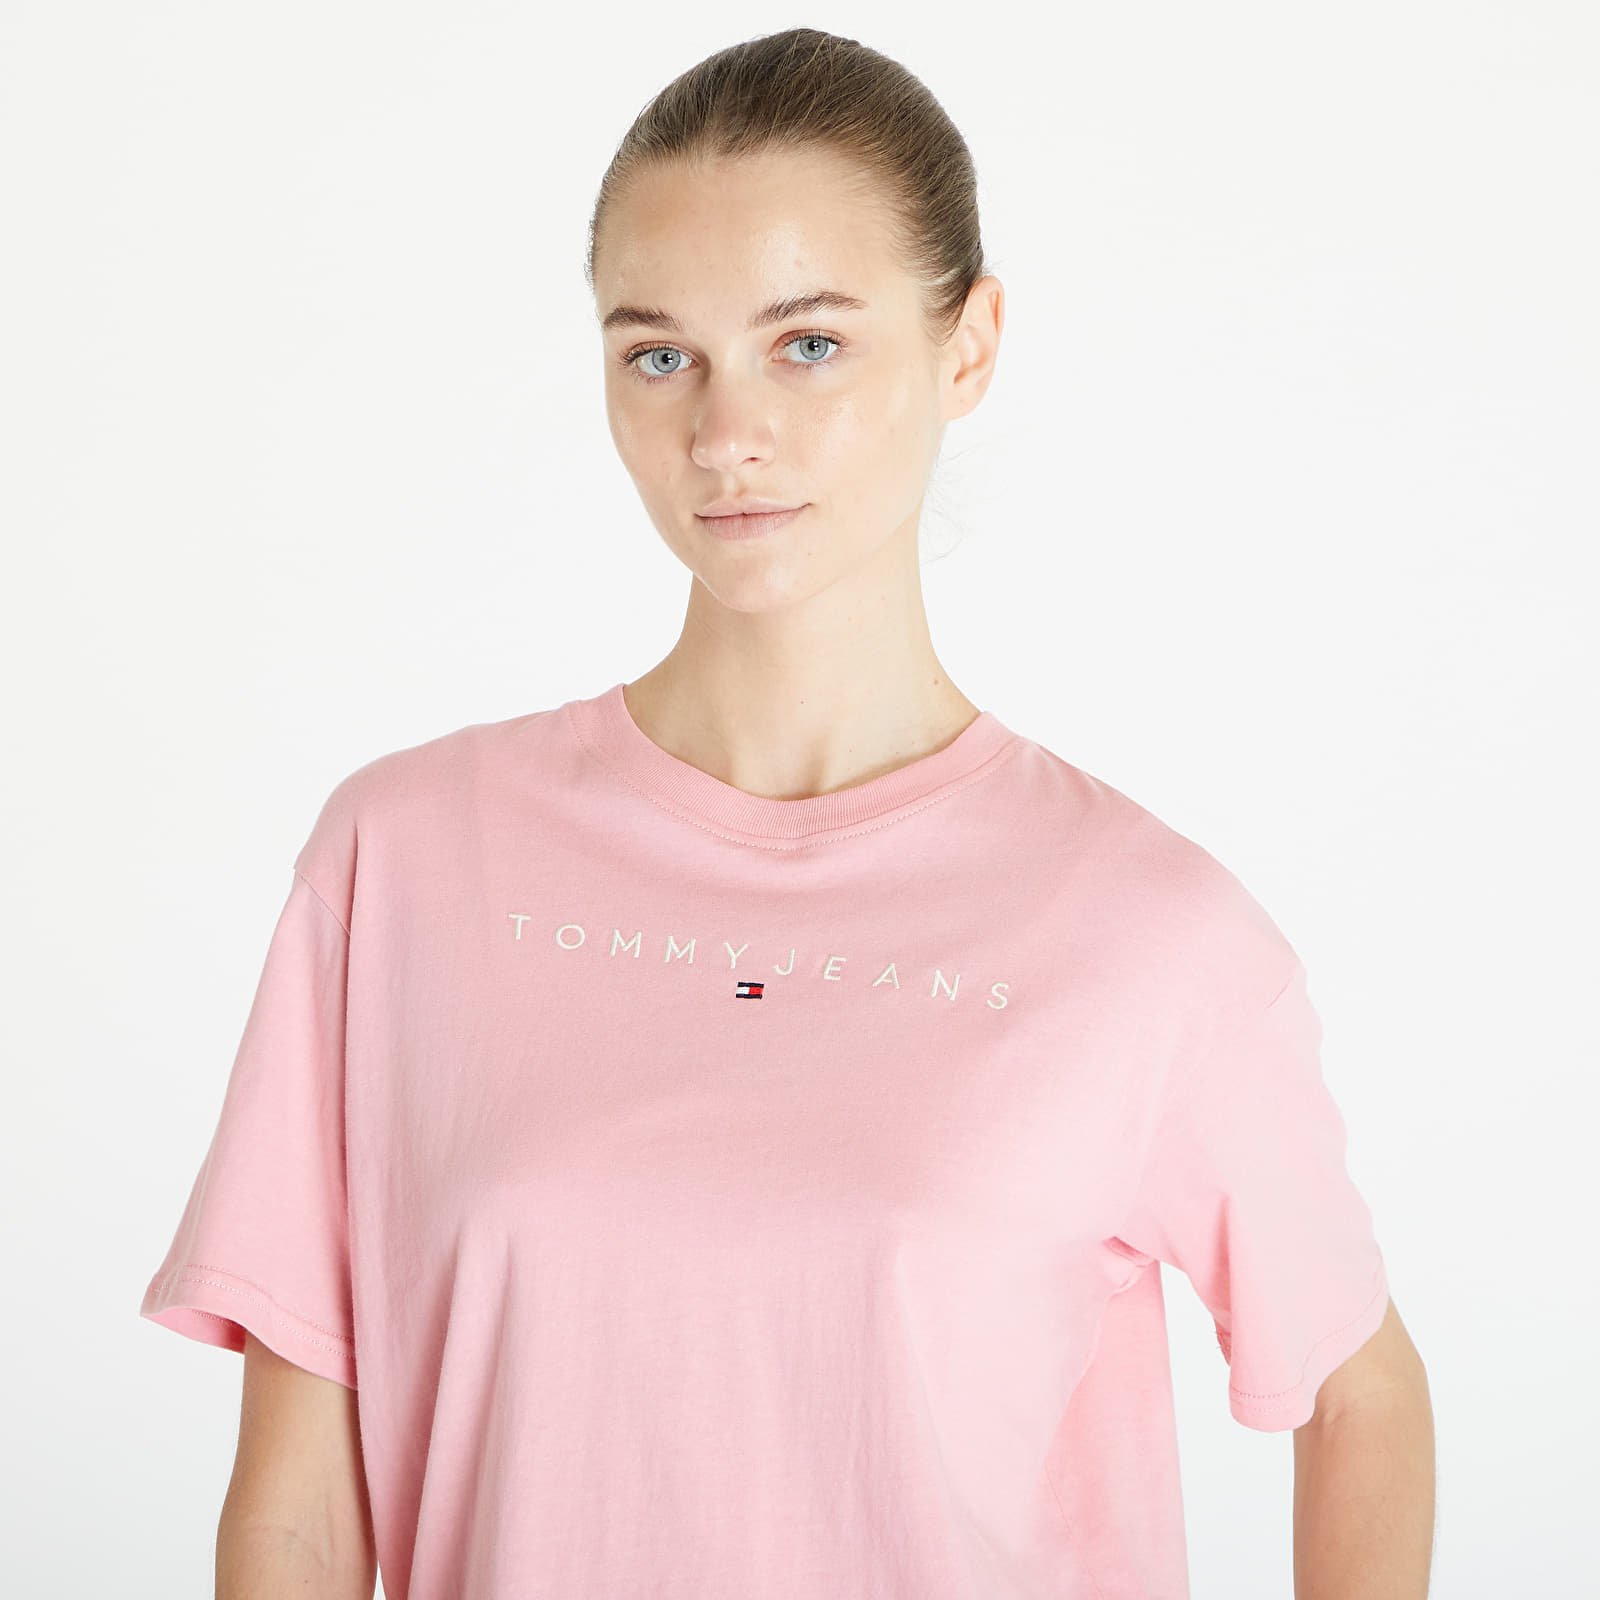 Relaxed New Linear Short Sleeve Tee